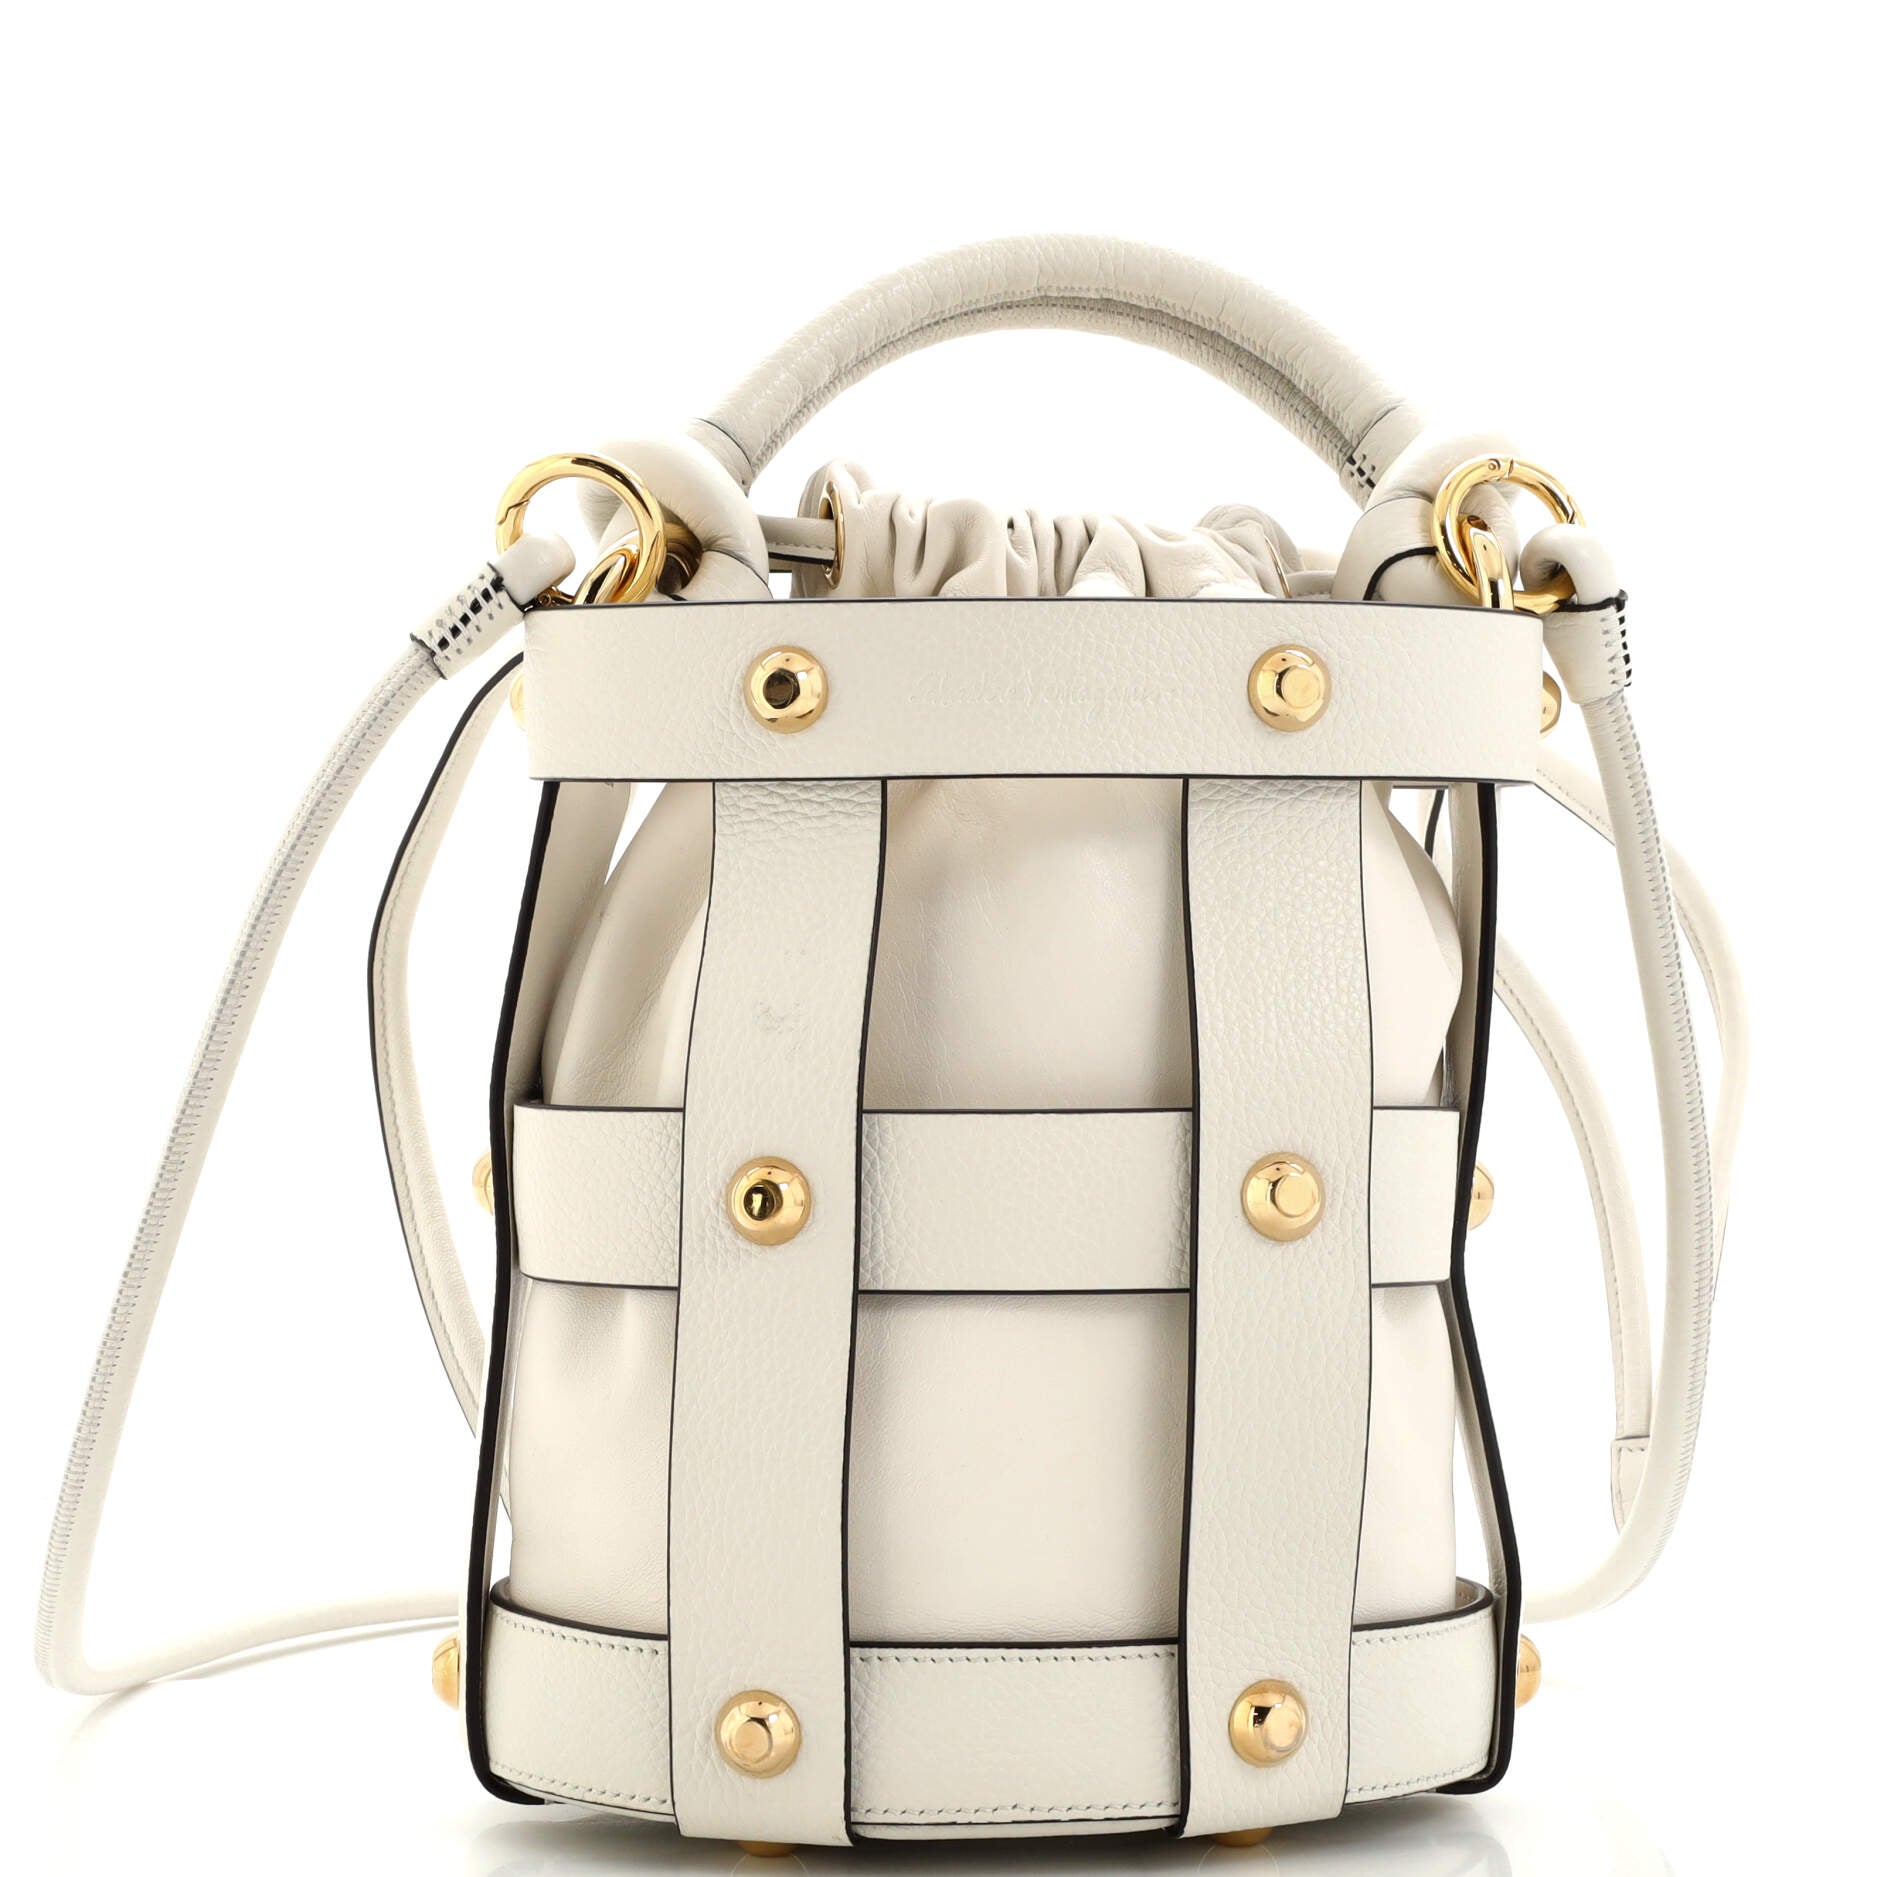 Cage Bucket Bag Leather Small